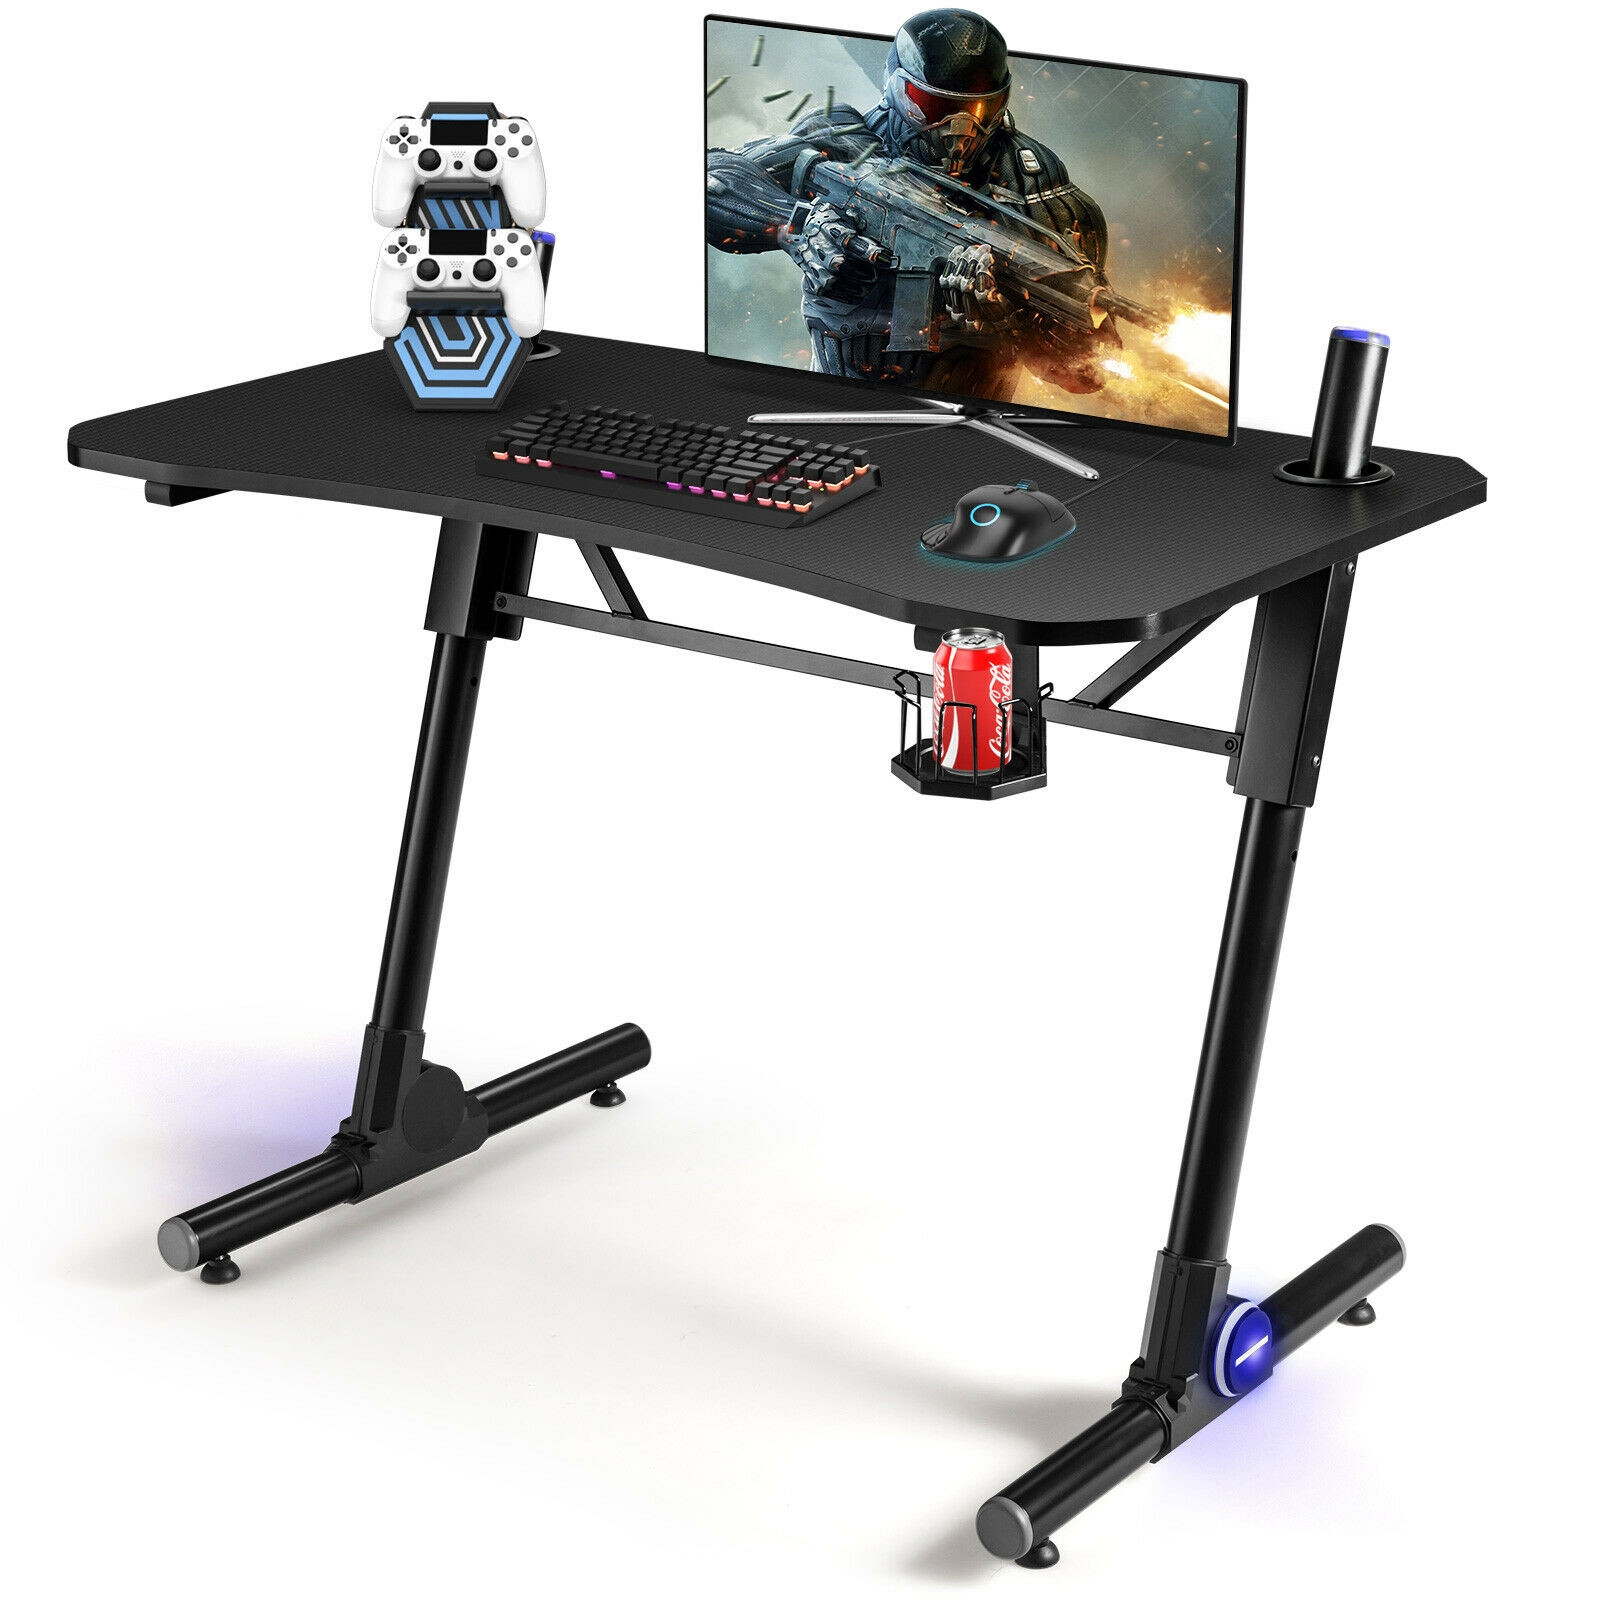 Perfect Costway Gaming Desk Review with Futuristic Setup